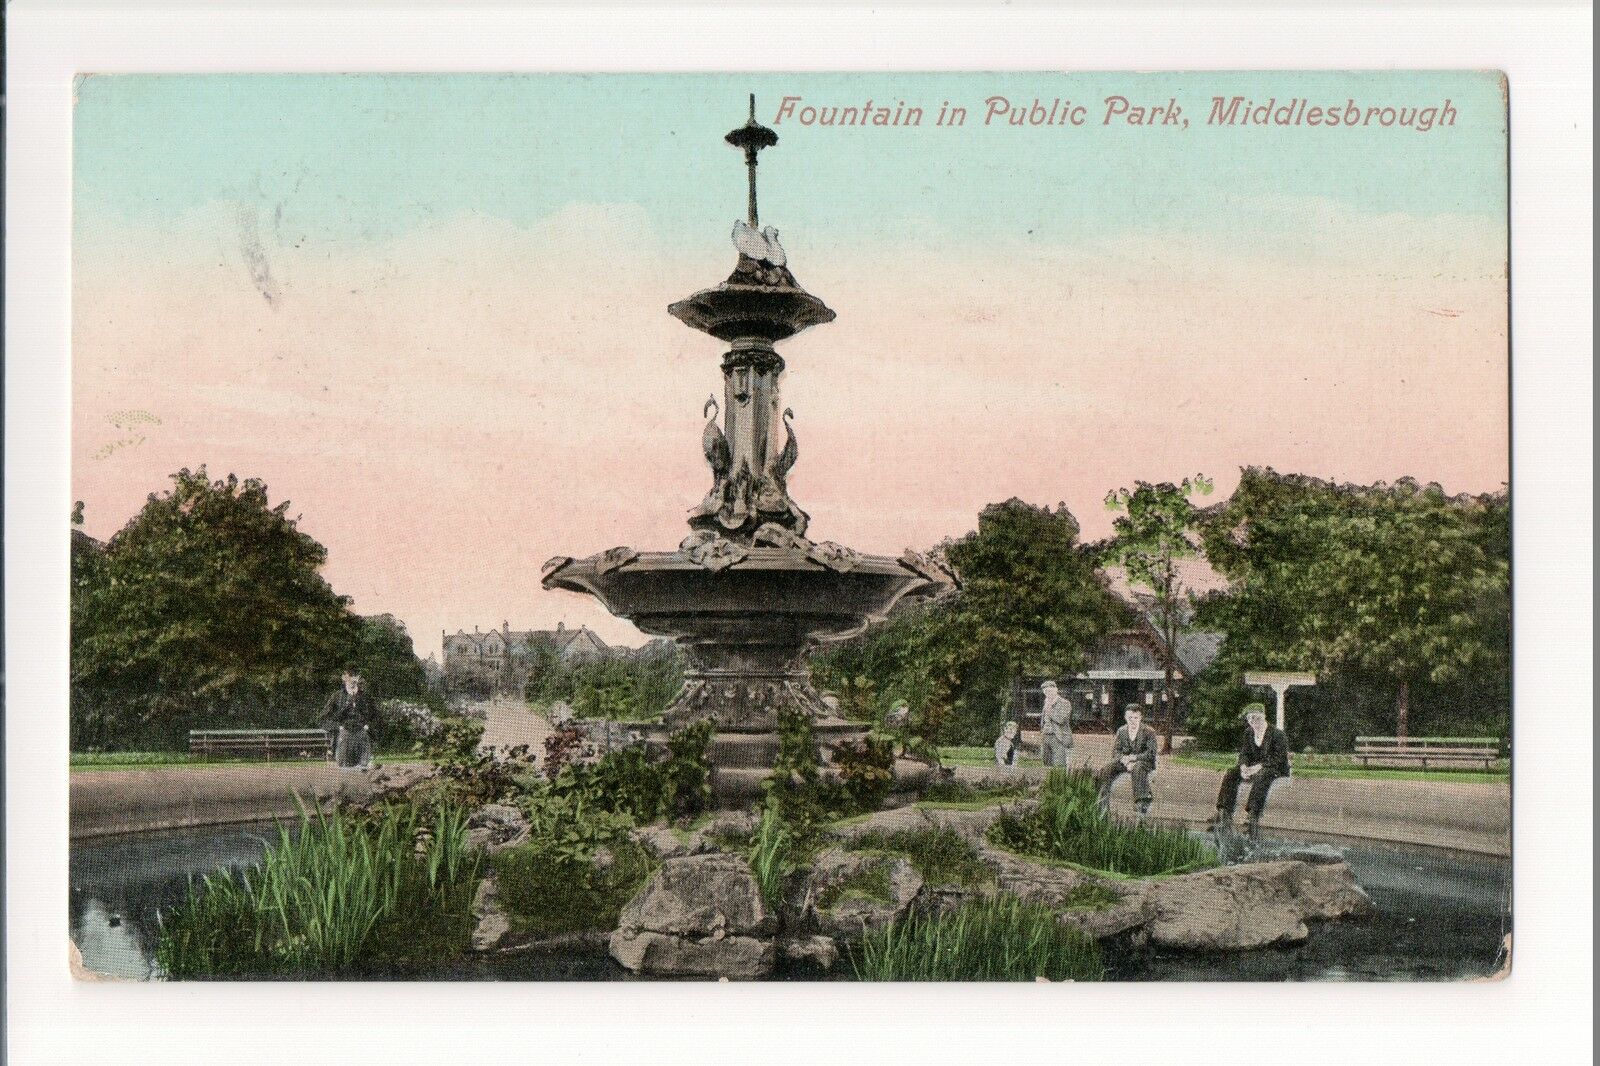 House Clearance - L@@K  Fountain in Public Park Middlesbrough 1911 Service  L@@K